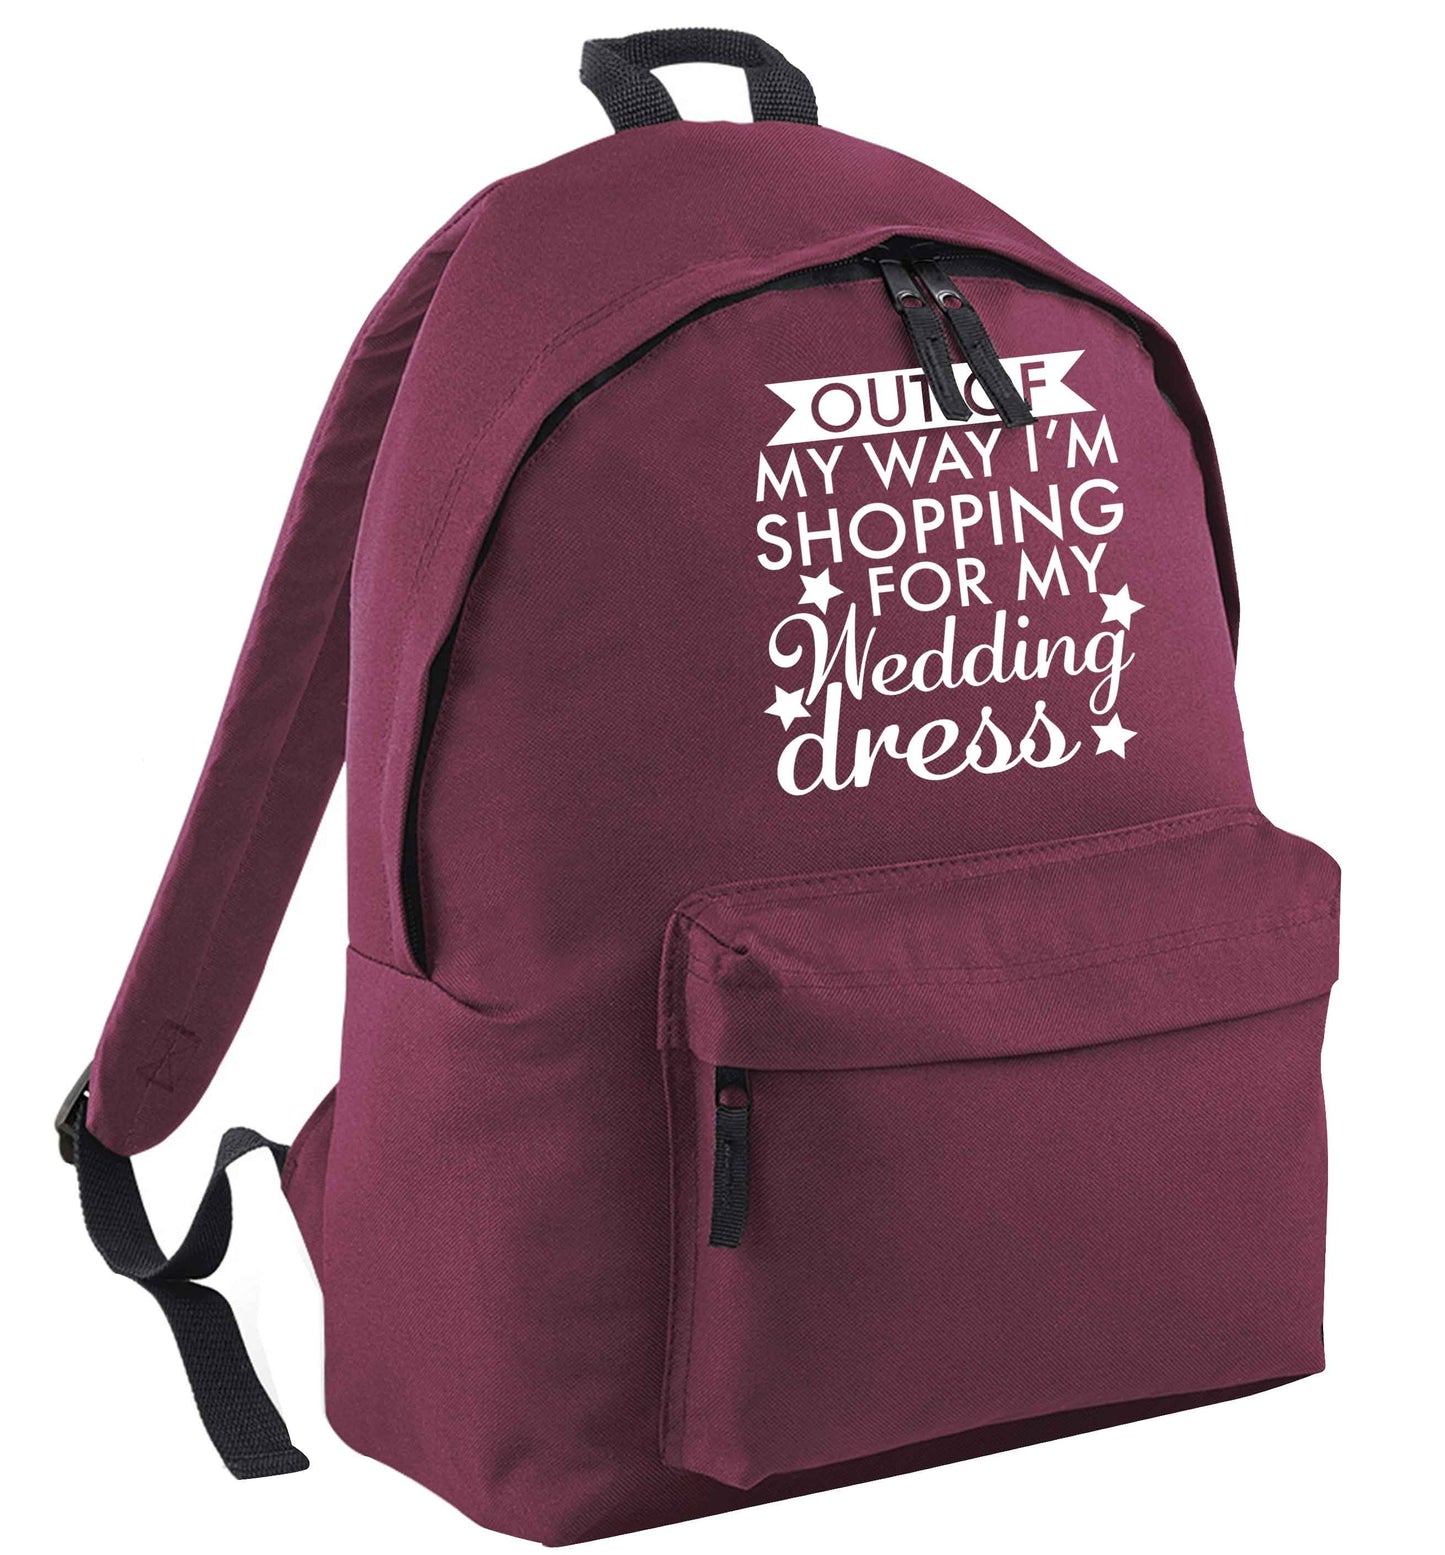 Out of my way I'm shopping for my wedding dress maroon adults backpack